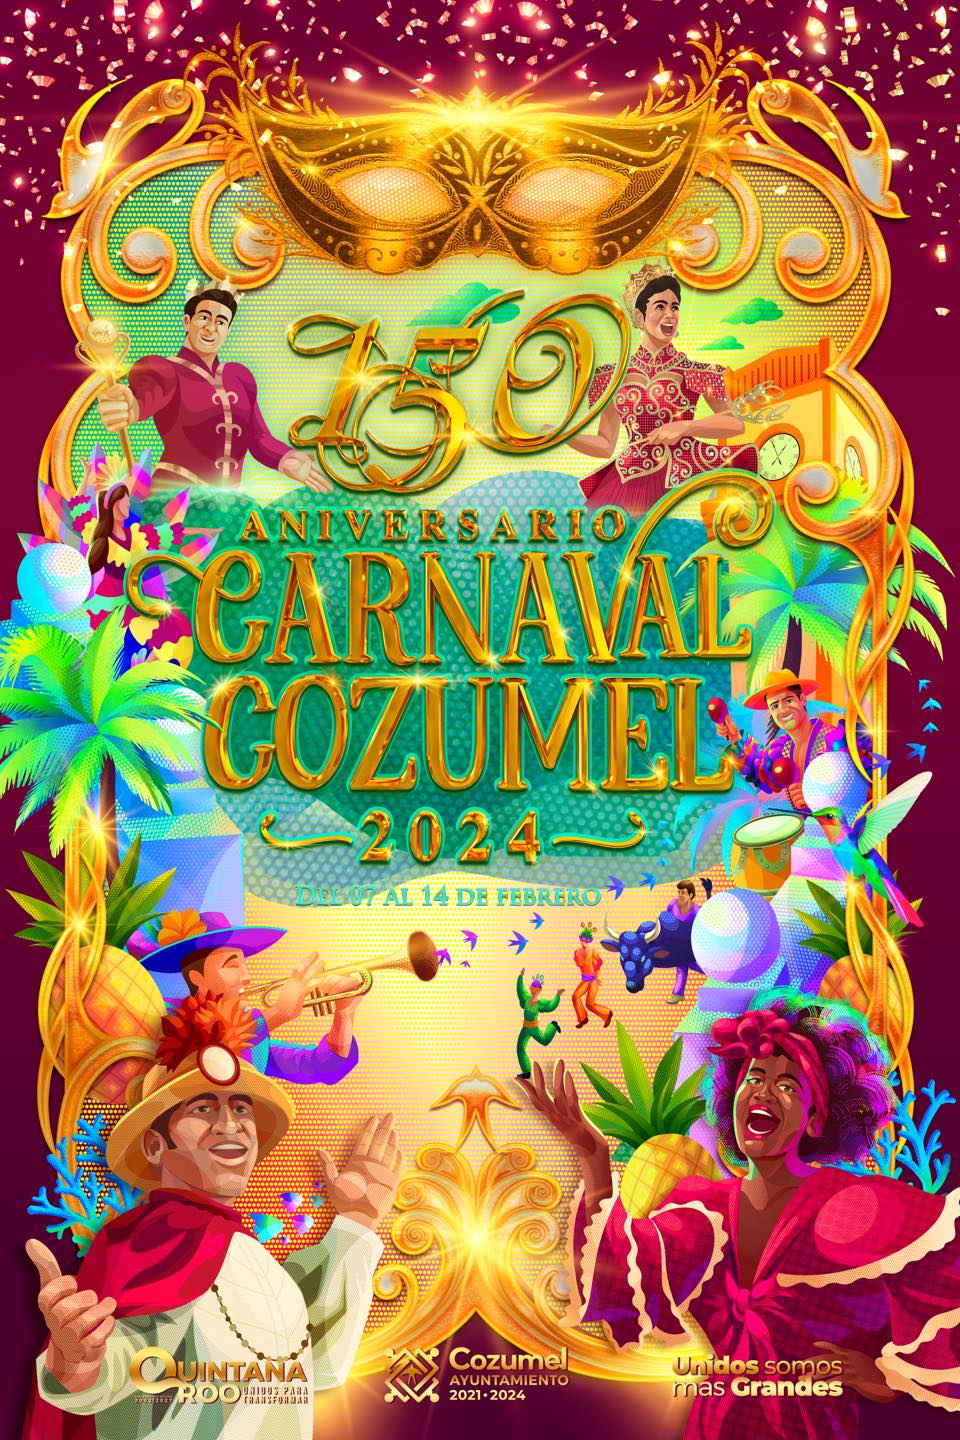 Carnaval 2024 - Celebrating 150 Years of Tradition!